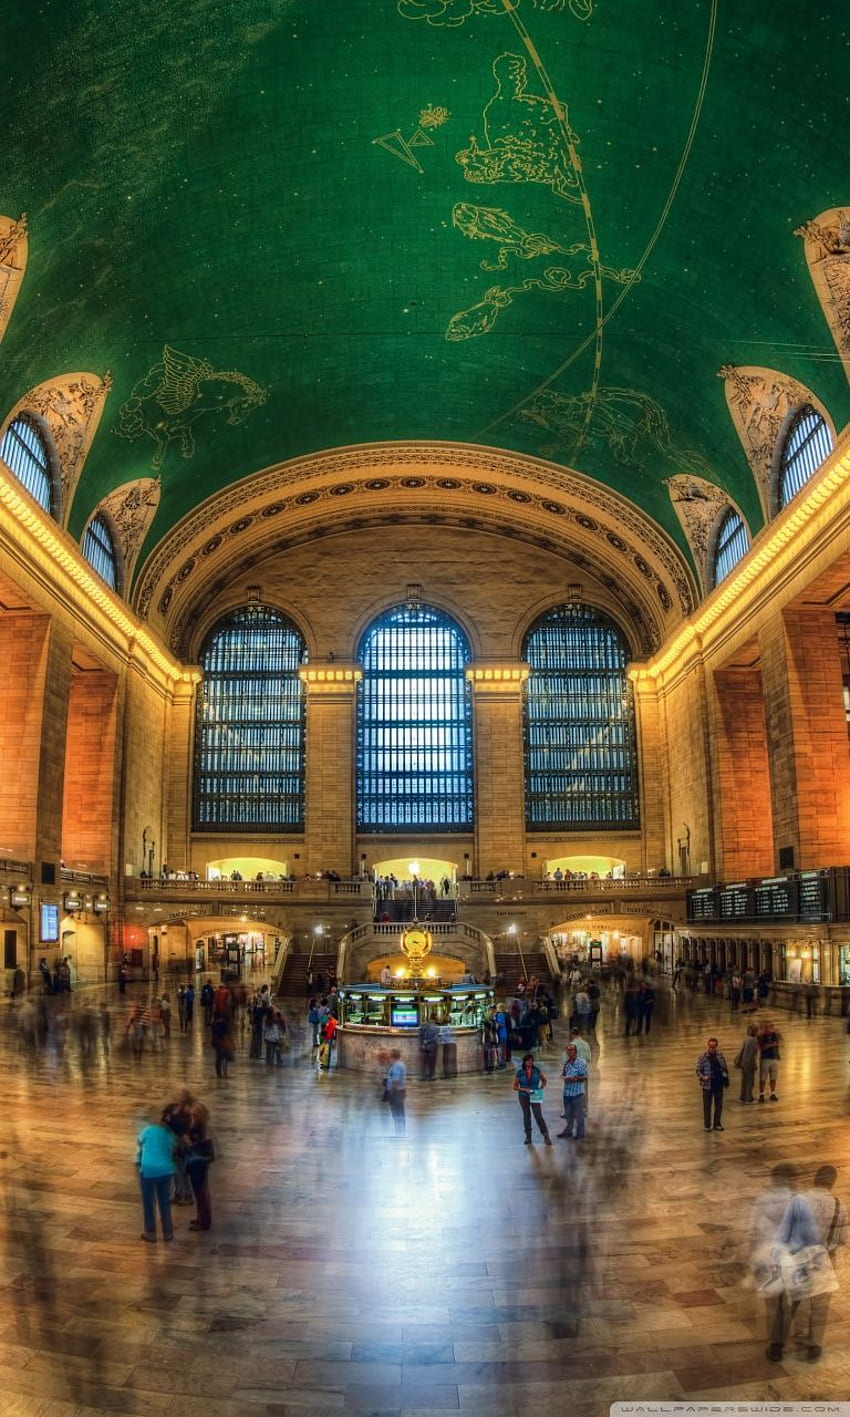 243 Grand Central Ceiling Stock Photos HighRes Pictures and Images   Getty Images